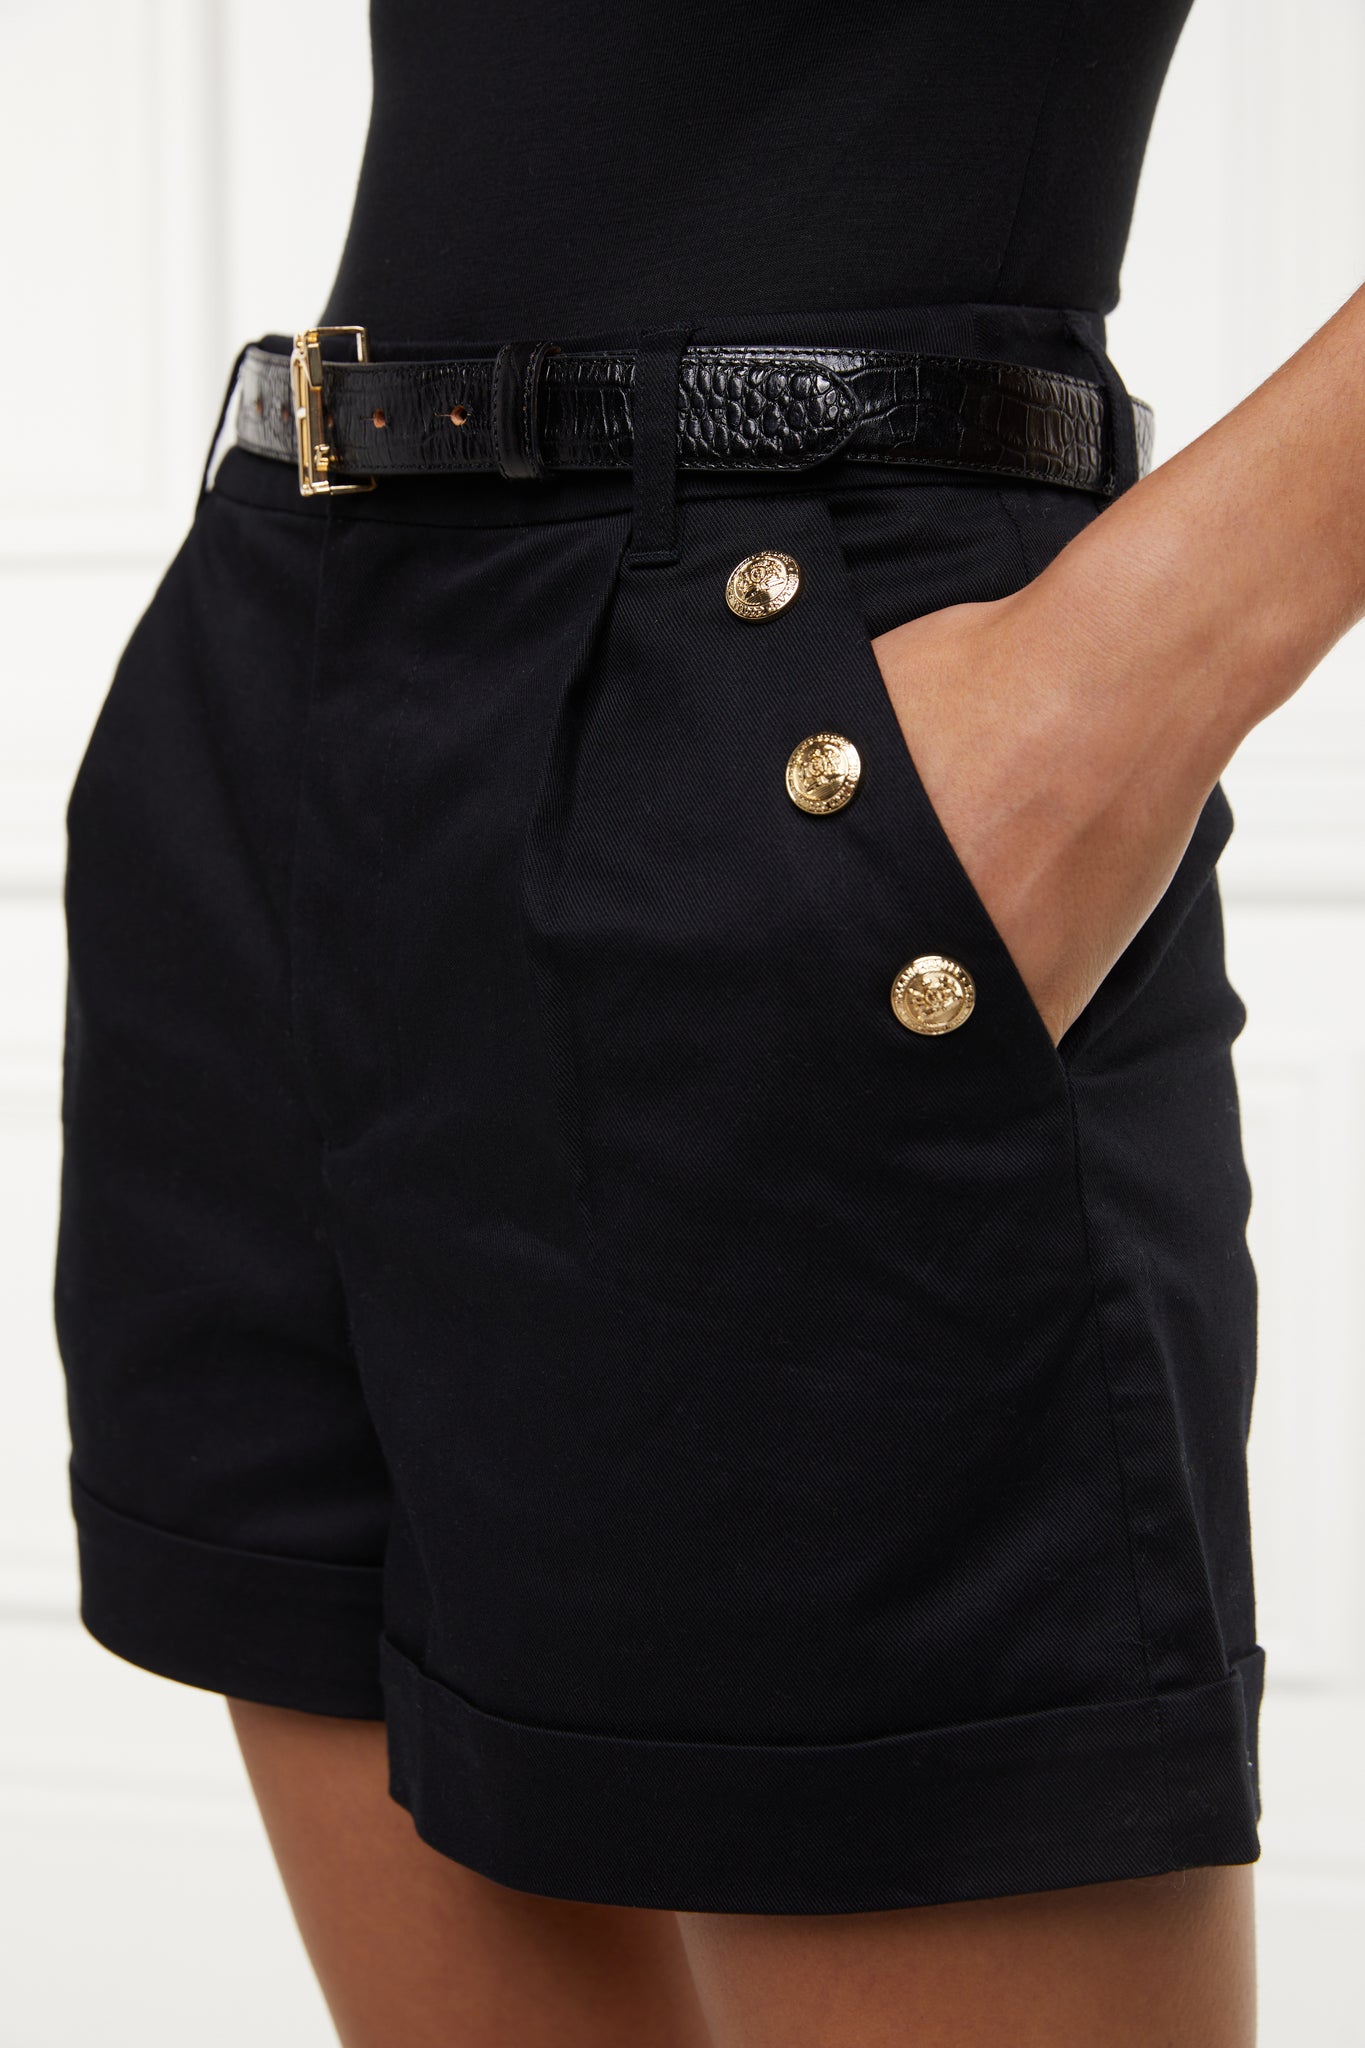 gold rivet on pocket detail of womens black high rise tailored shorts with decorative gold rivets that follow the pocket line in a sailor style with a turned up hem worn with black bodysuit